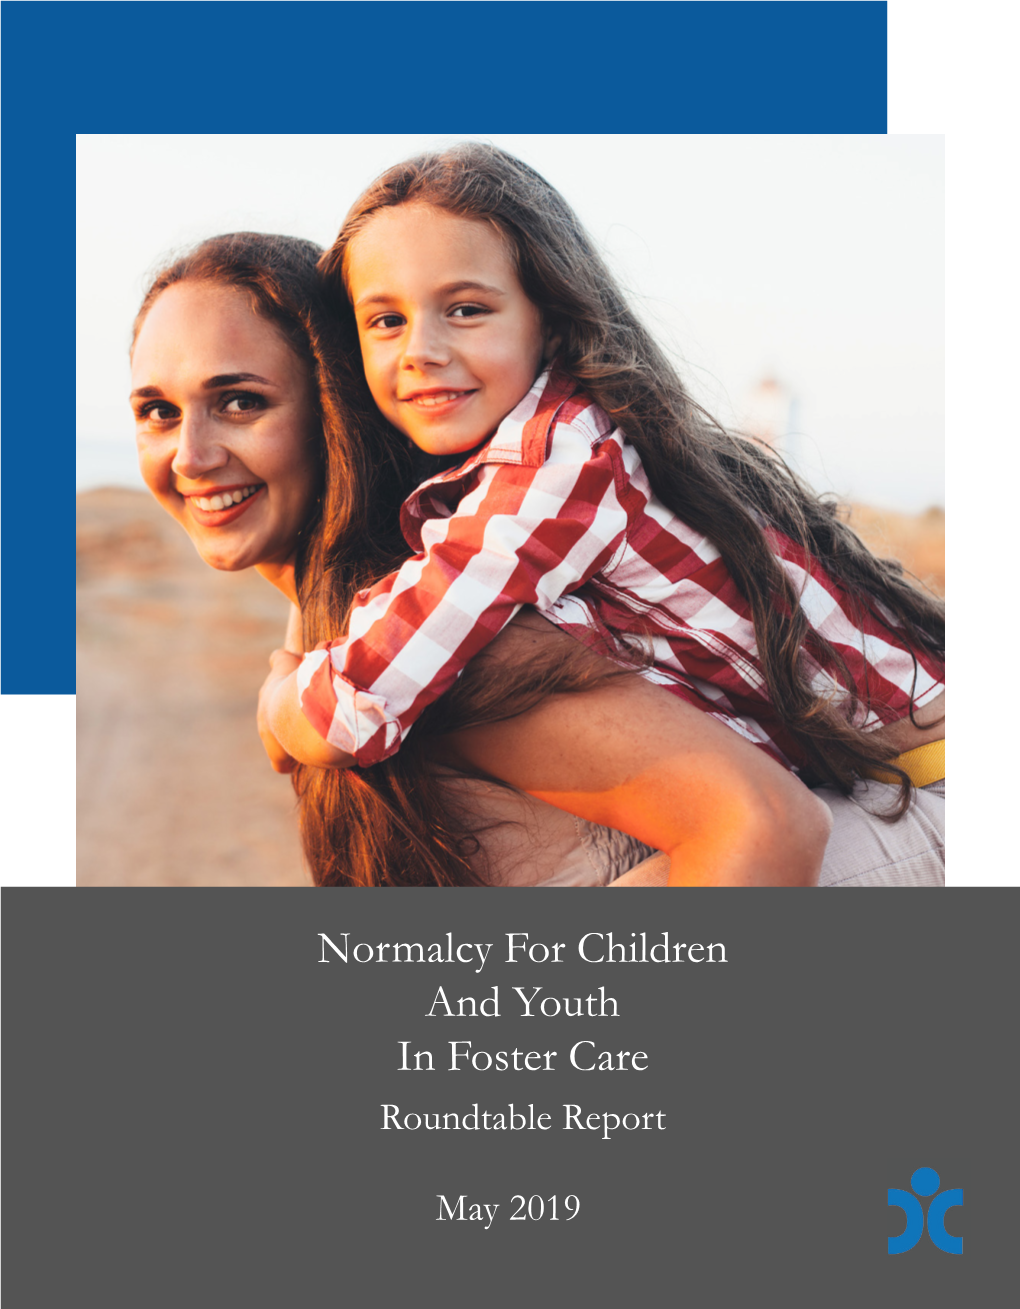 Normalcy for Children and Youth in Foster Care Roundtable Report